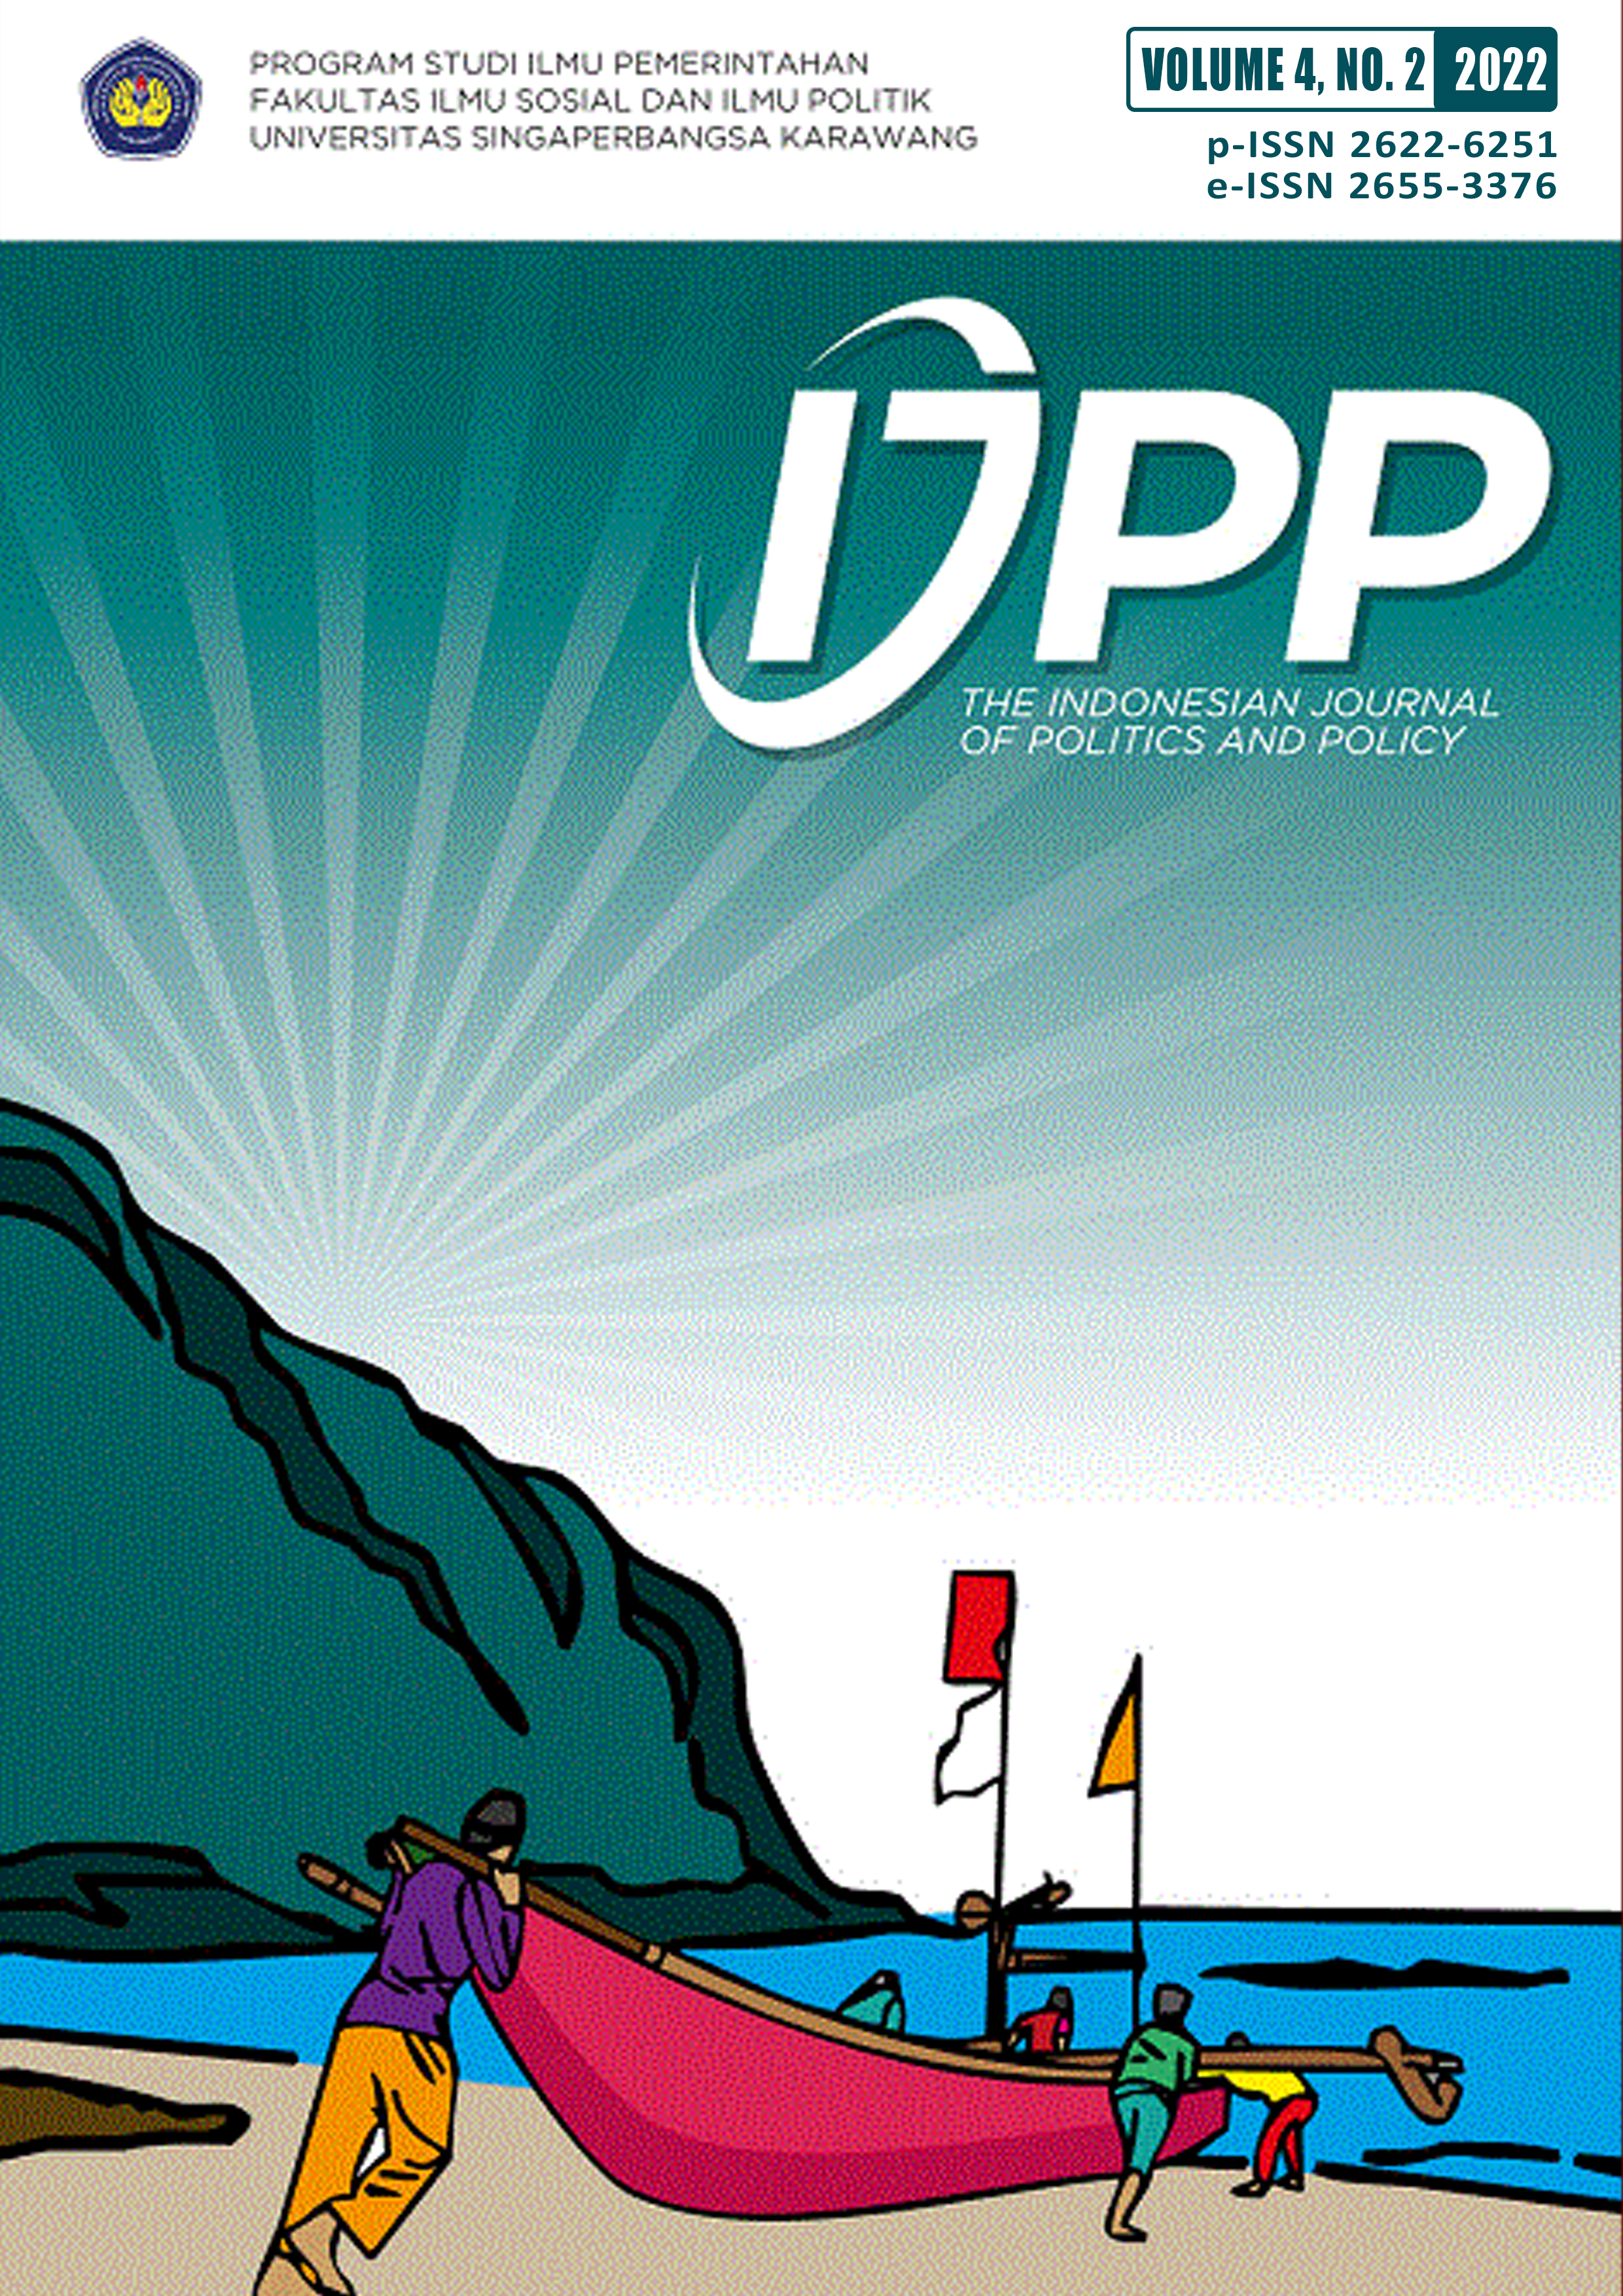 					Lihat Vol 4 No 2 (2022): THE INDONESIAN JOURNAL OF POLITICS AND POLICY
				